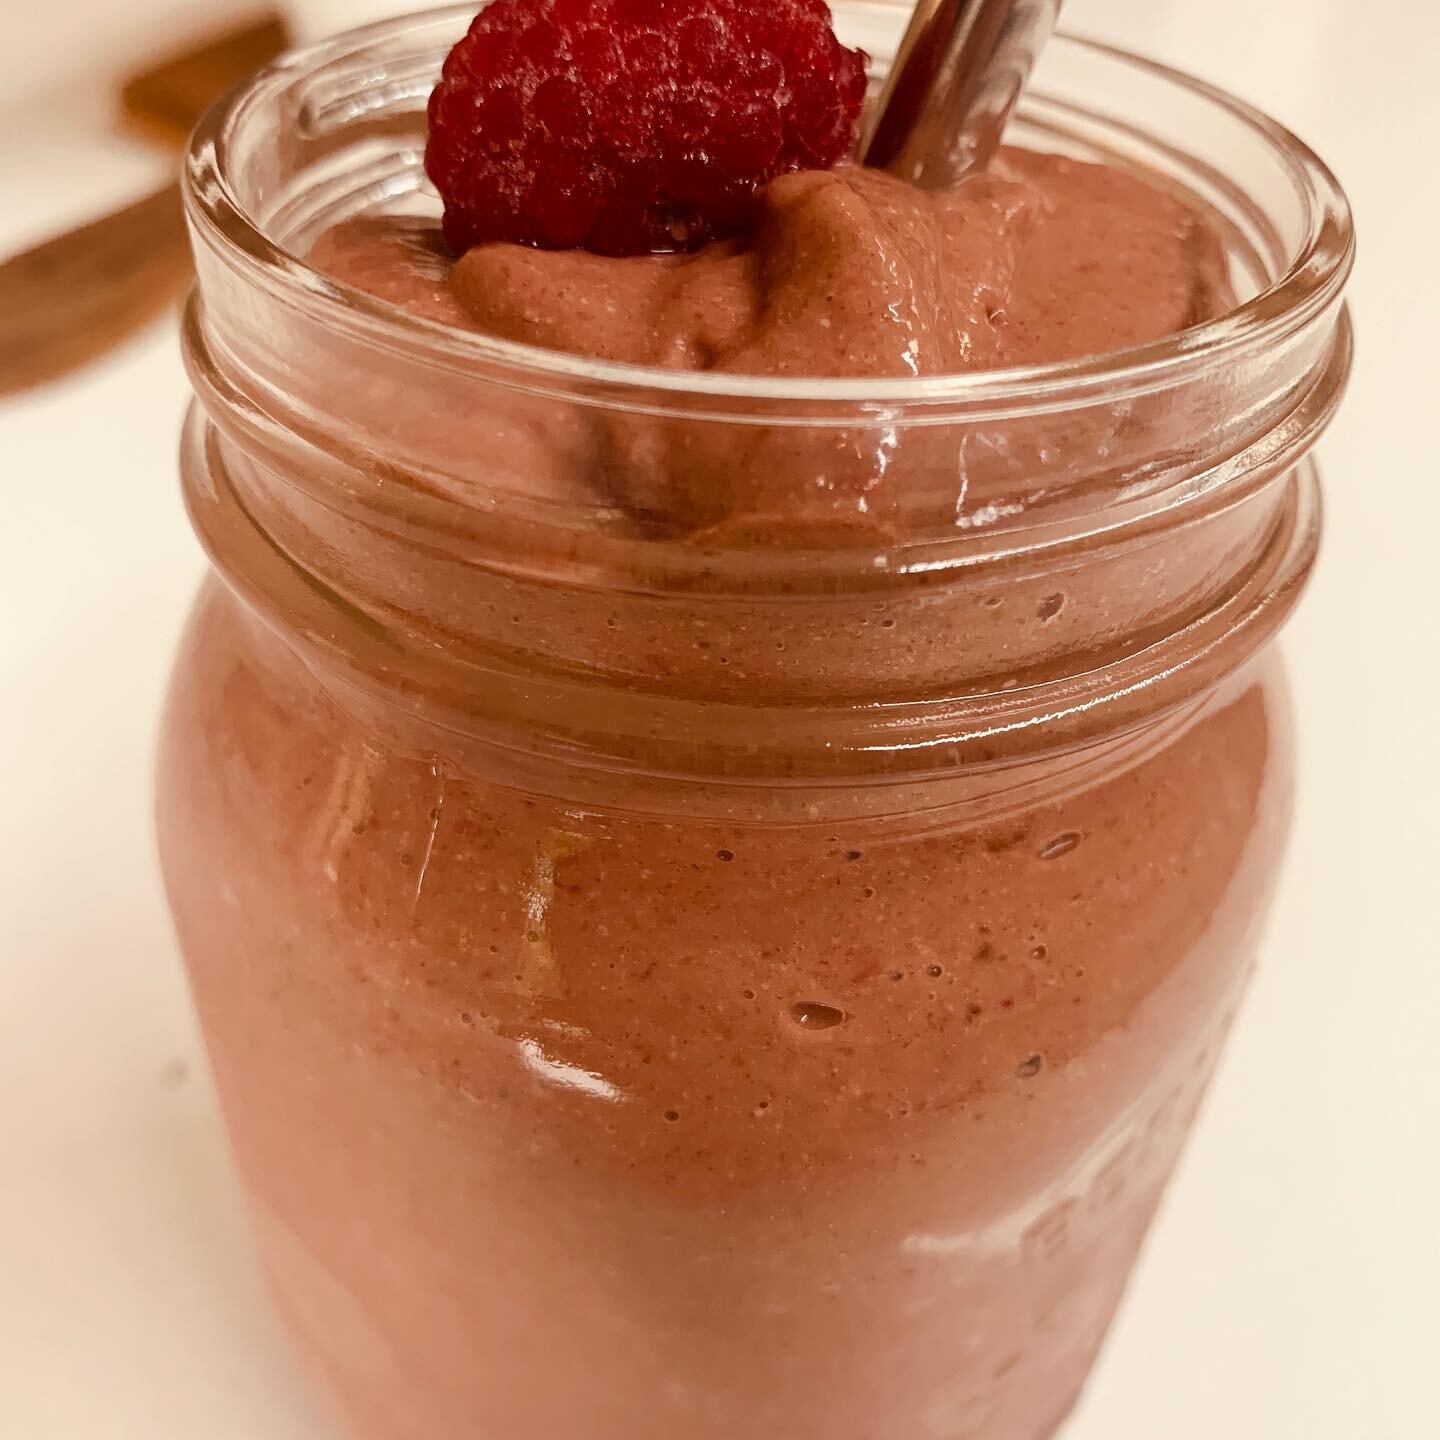 Smoothies are a great way to increase your daily fruit and vegetable intake and to recover from your at home workout session. Looking for smoothie base inspo beyond spinach and banana? See link in bio for my Tart Raspberry Smoothie recipe.